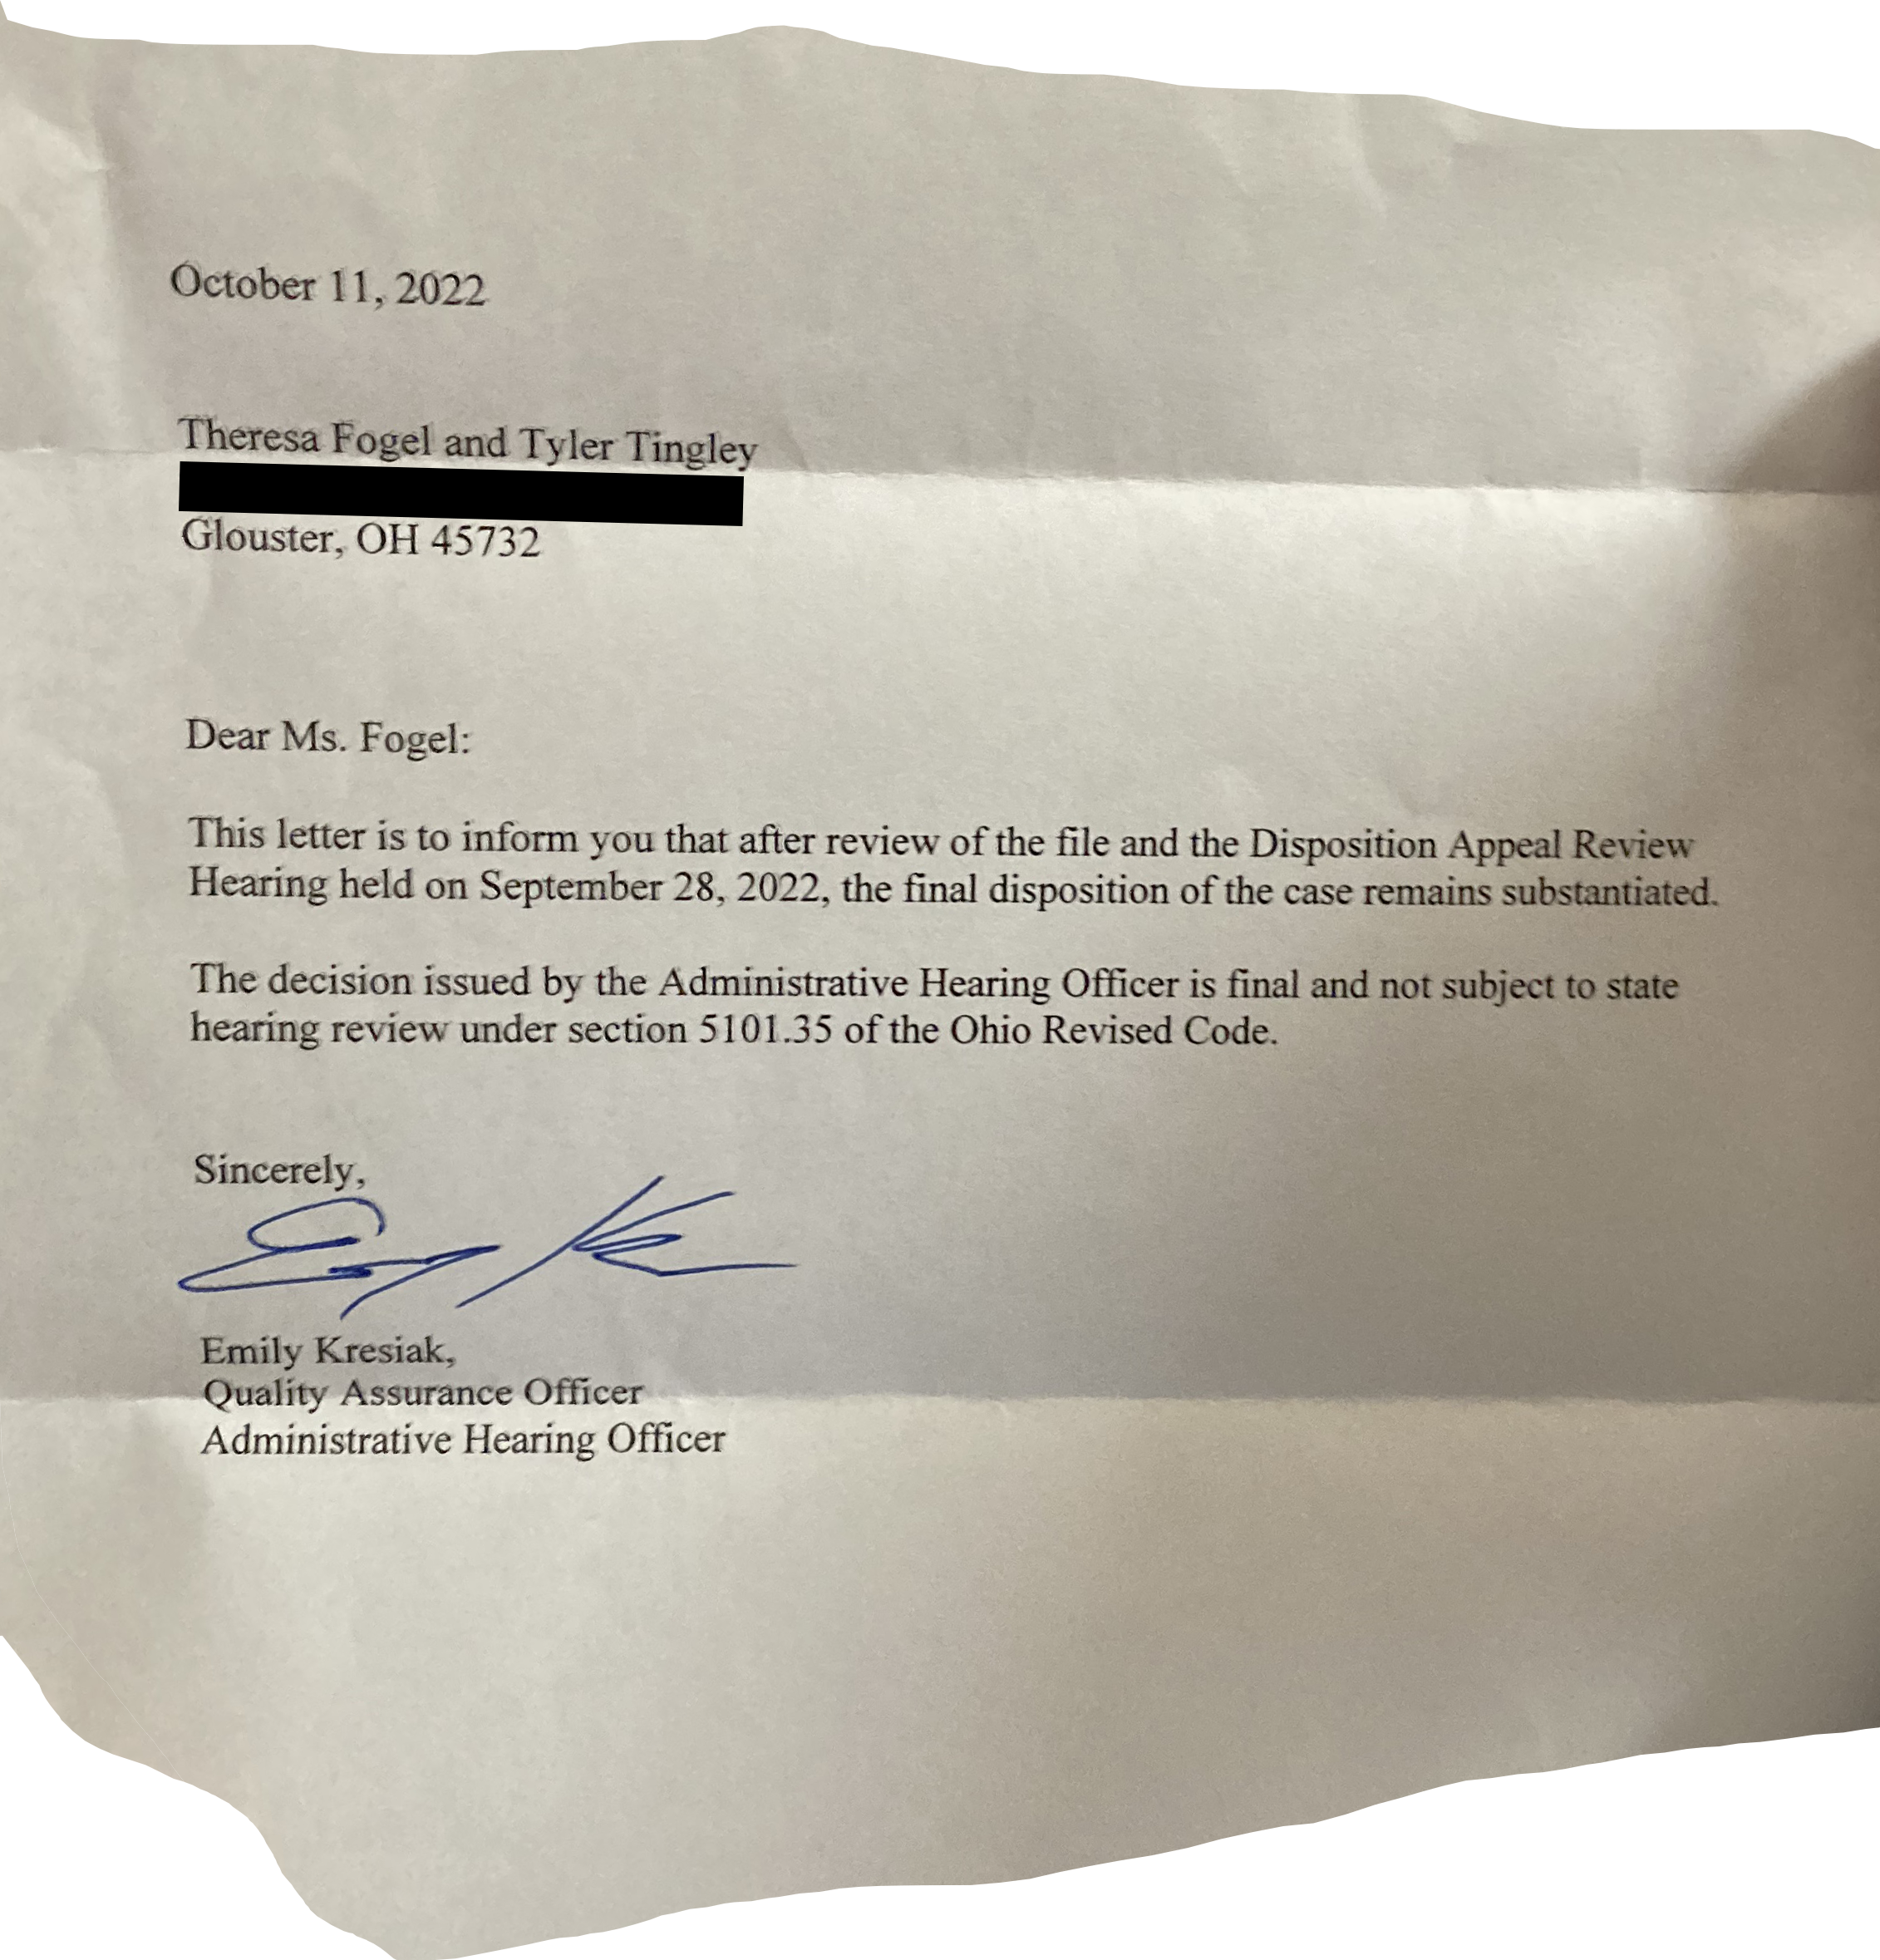 The letter Theresa Fogel received from Children Services after her disposition appeal revierw hearing hearing